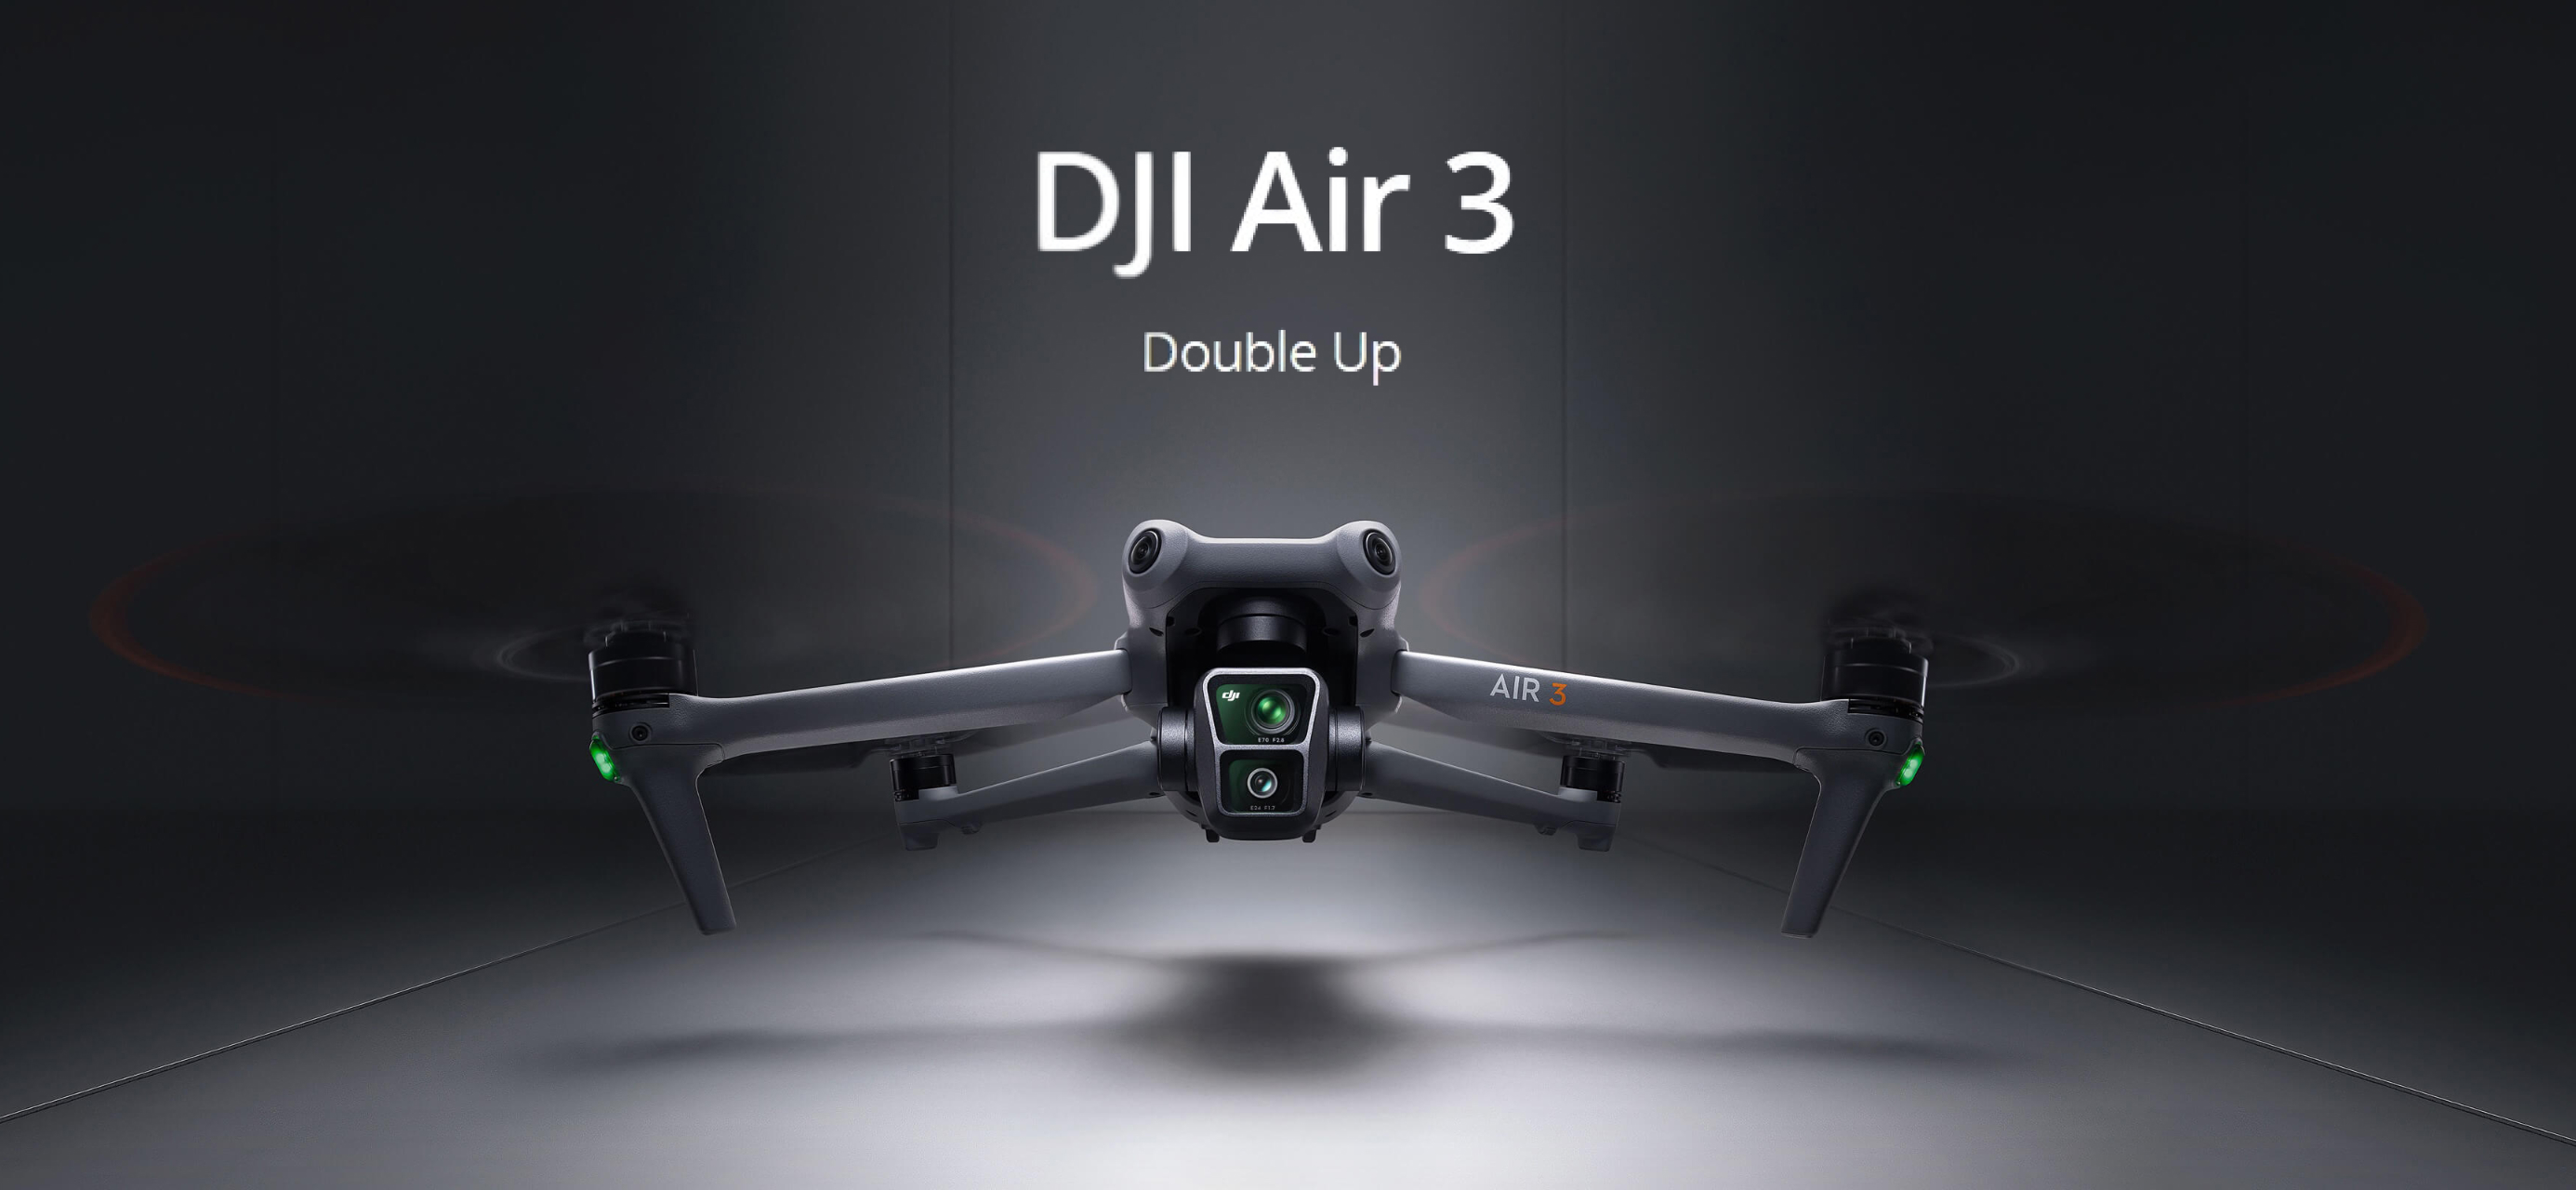 DJI Air 3: With smoothness, dual cameras and enhanced safety features, is this the best drone out there?